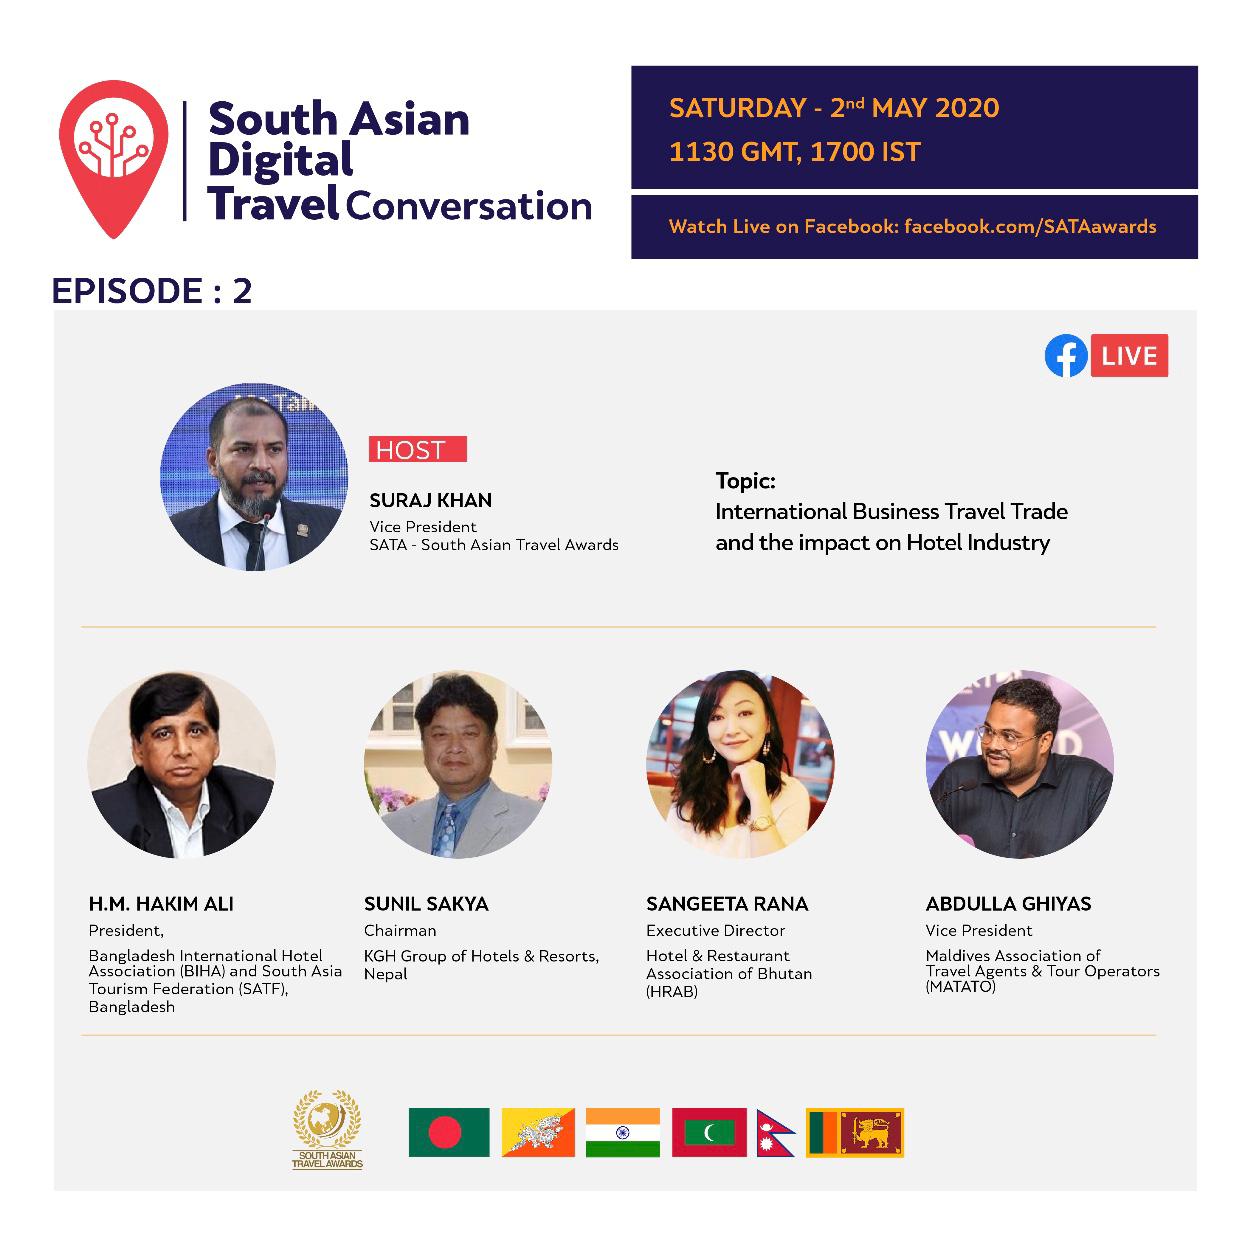 Second Episode of South Asian Digital Travel Conversation to Air On Saturday